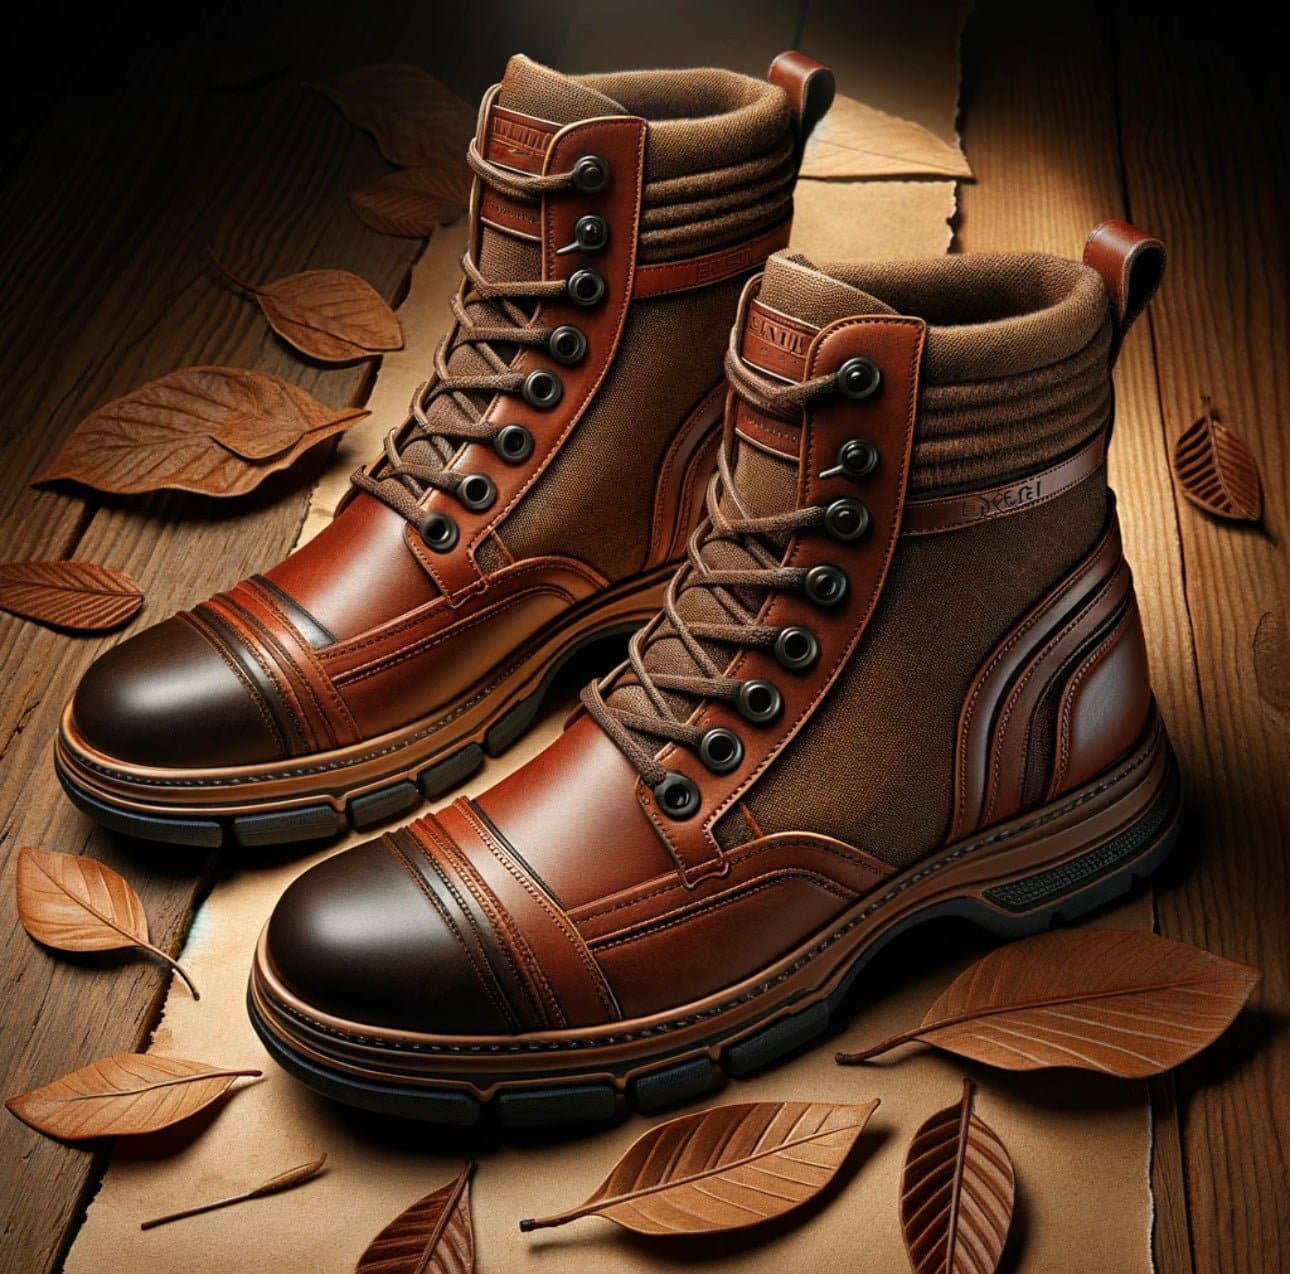 Trailblazer Luxe Boots - Exici